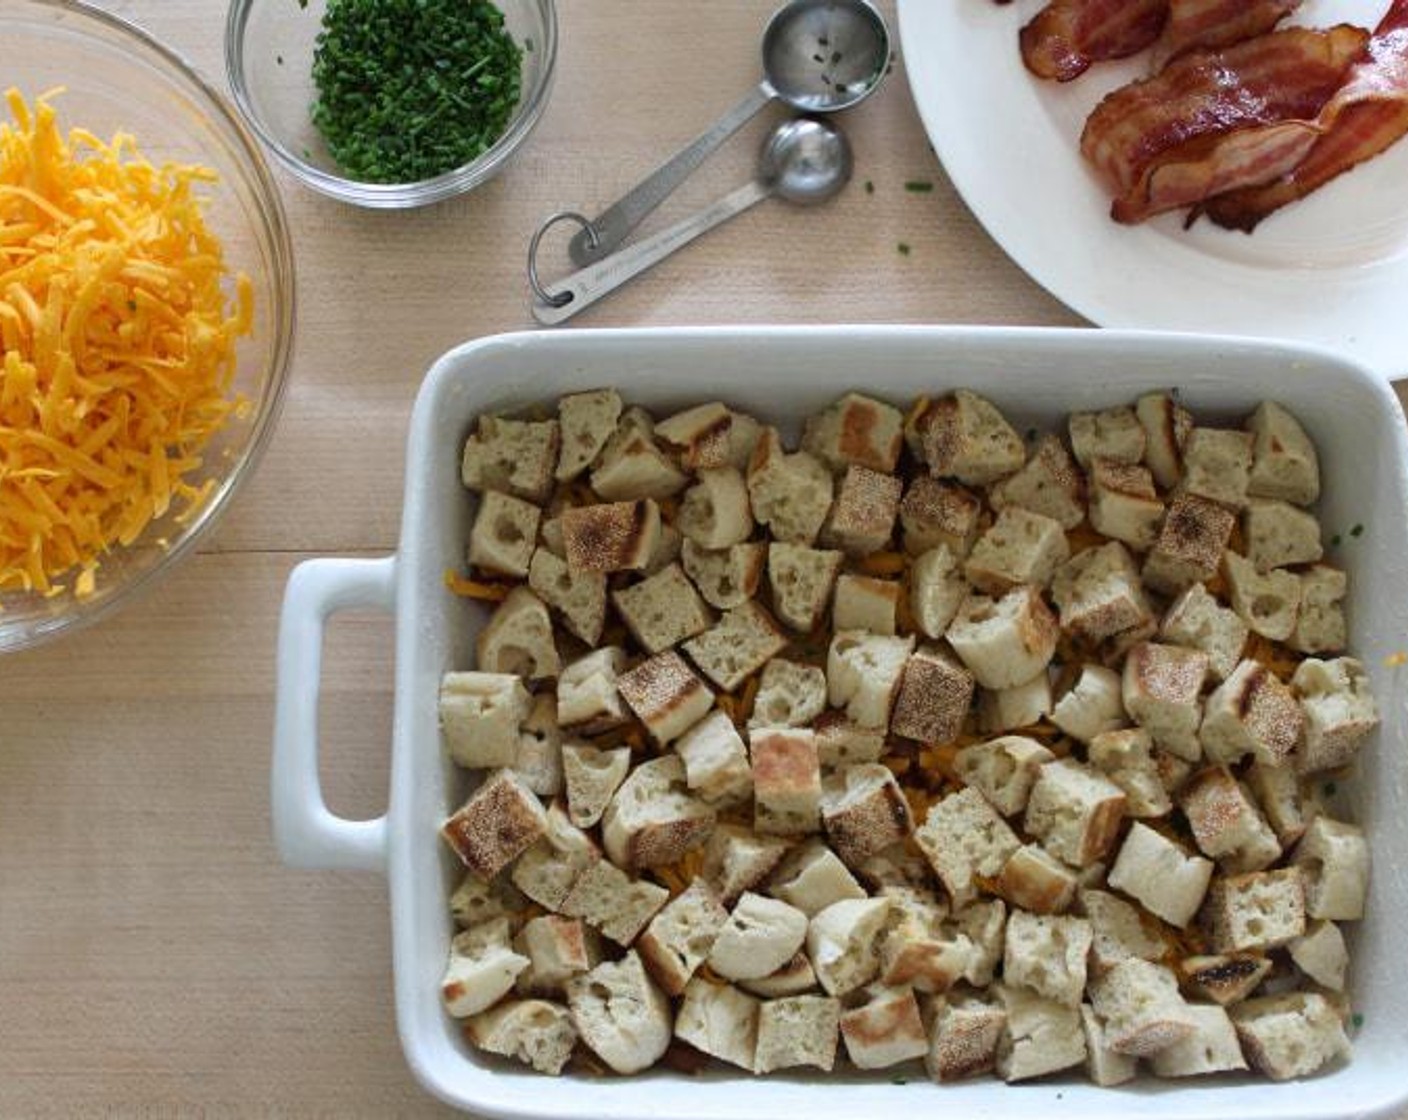 step 7 To assemble, sprinkle half of the bacon, Fresh Chives (1 1/2 Tbsp), and 1 cup of the Sharp Cheddar Cheese (3/4 cup) in that order, onto the bottom of the baking dish. Add the English muffin cubes on top in one even layer.